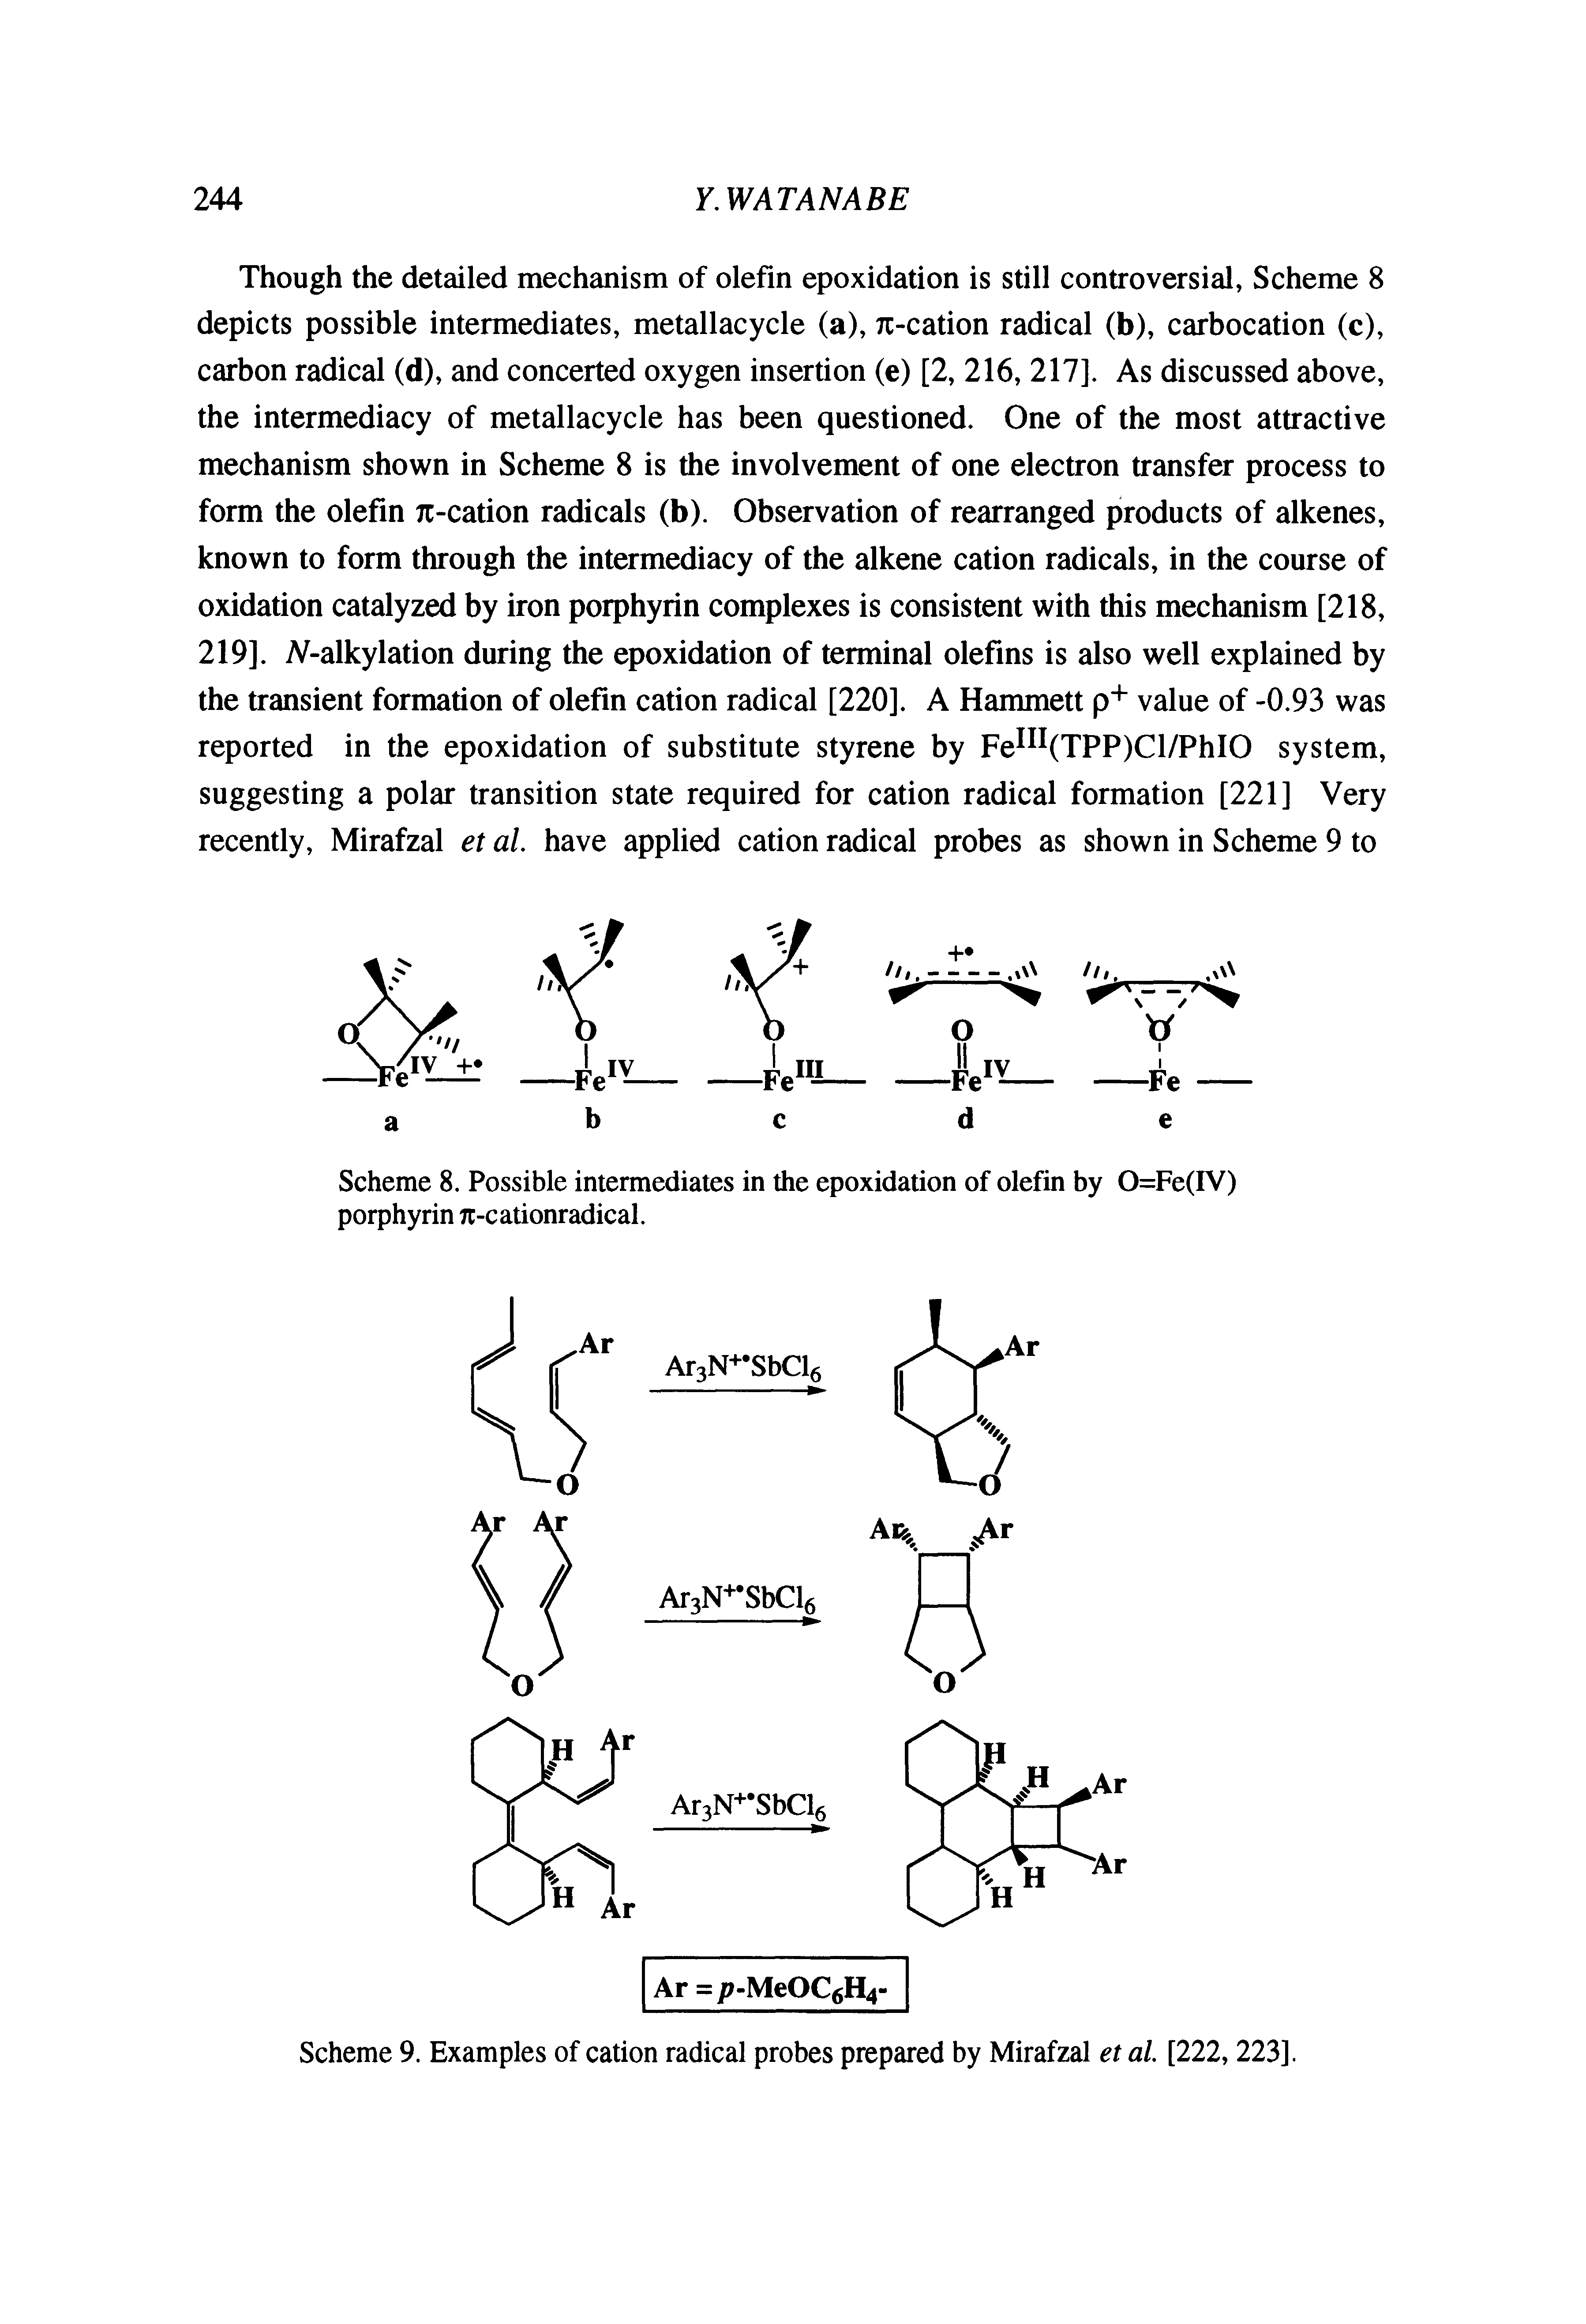 Scheme 9. Examples of cation radical probes prepared by Mirafzal et al. [222,223].